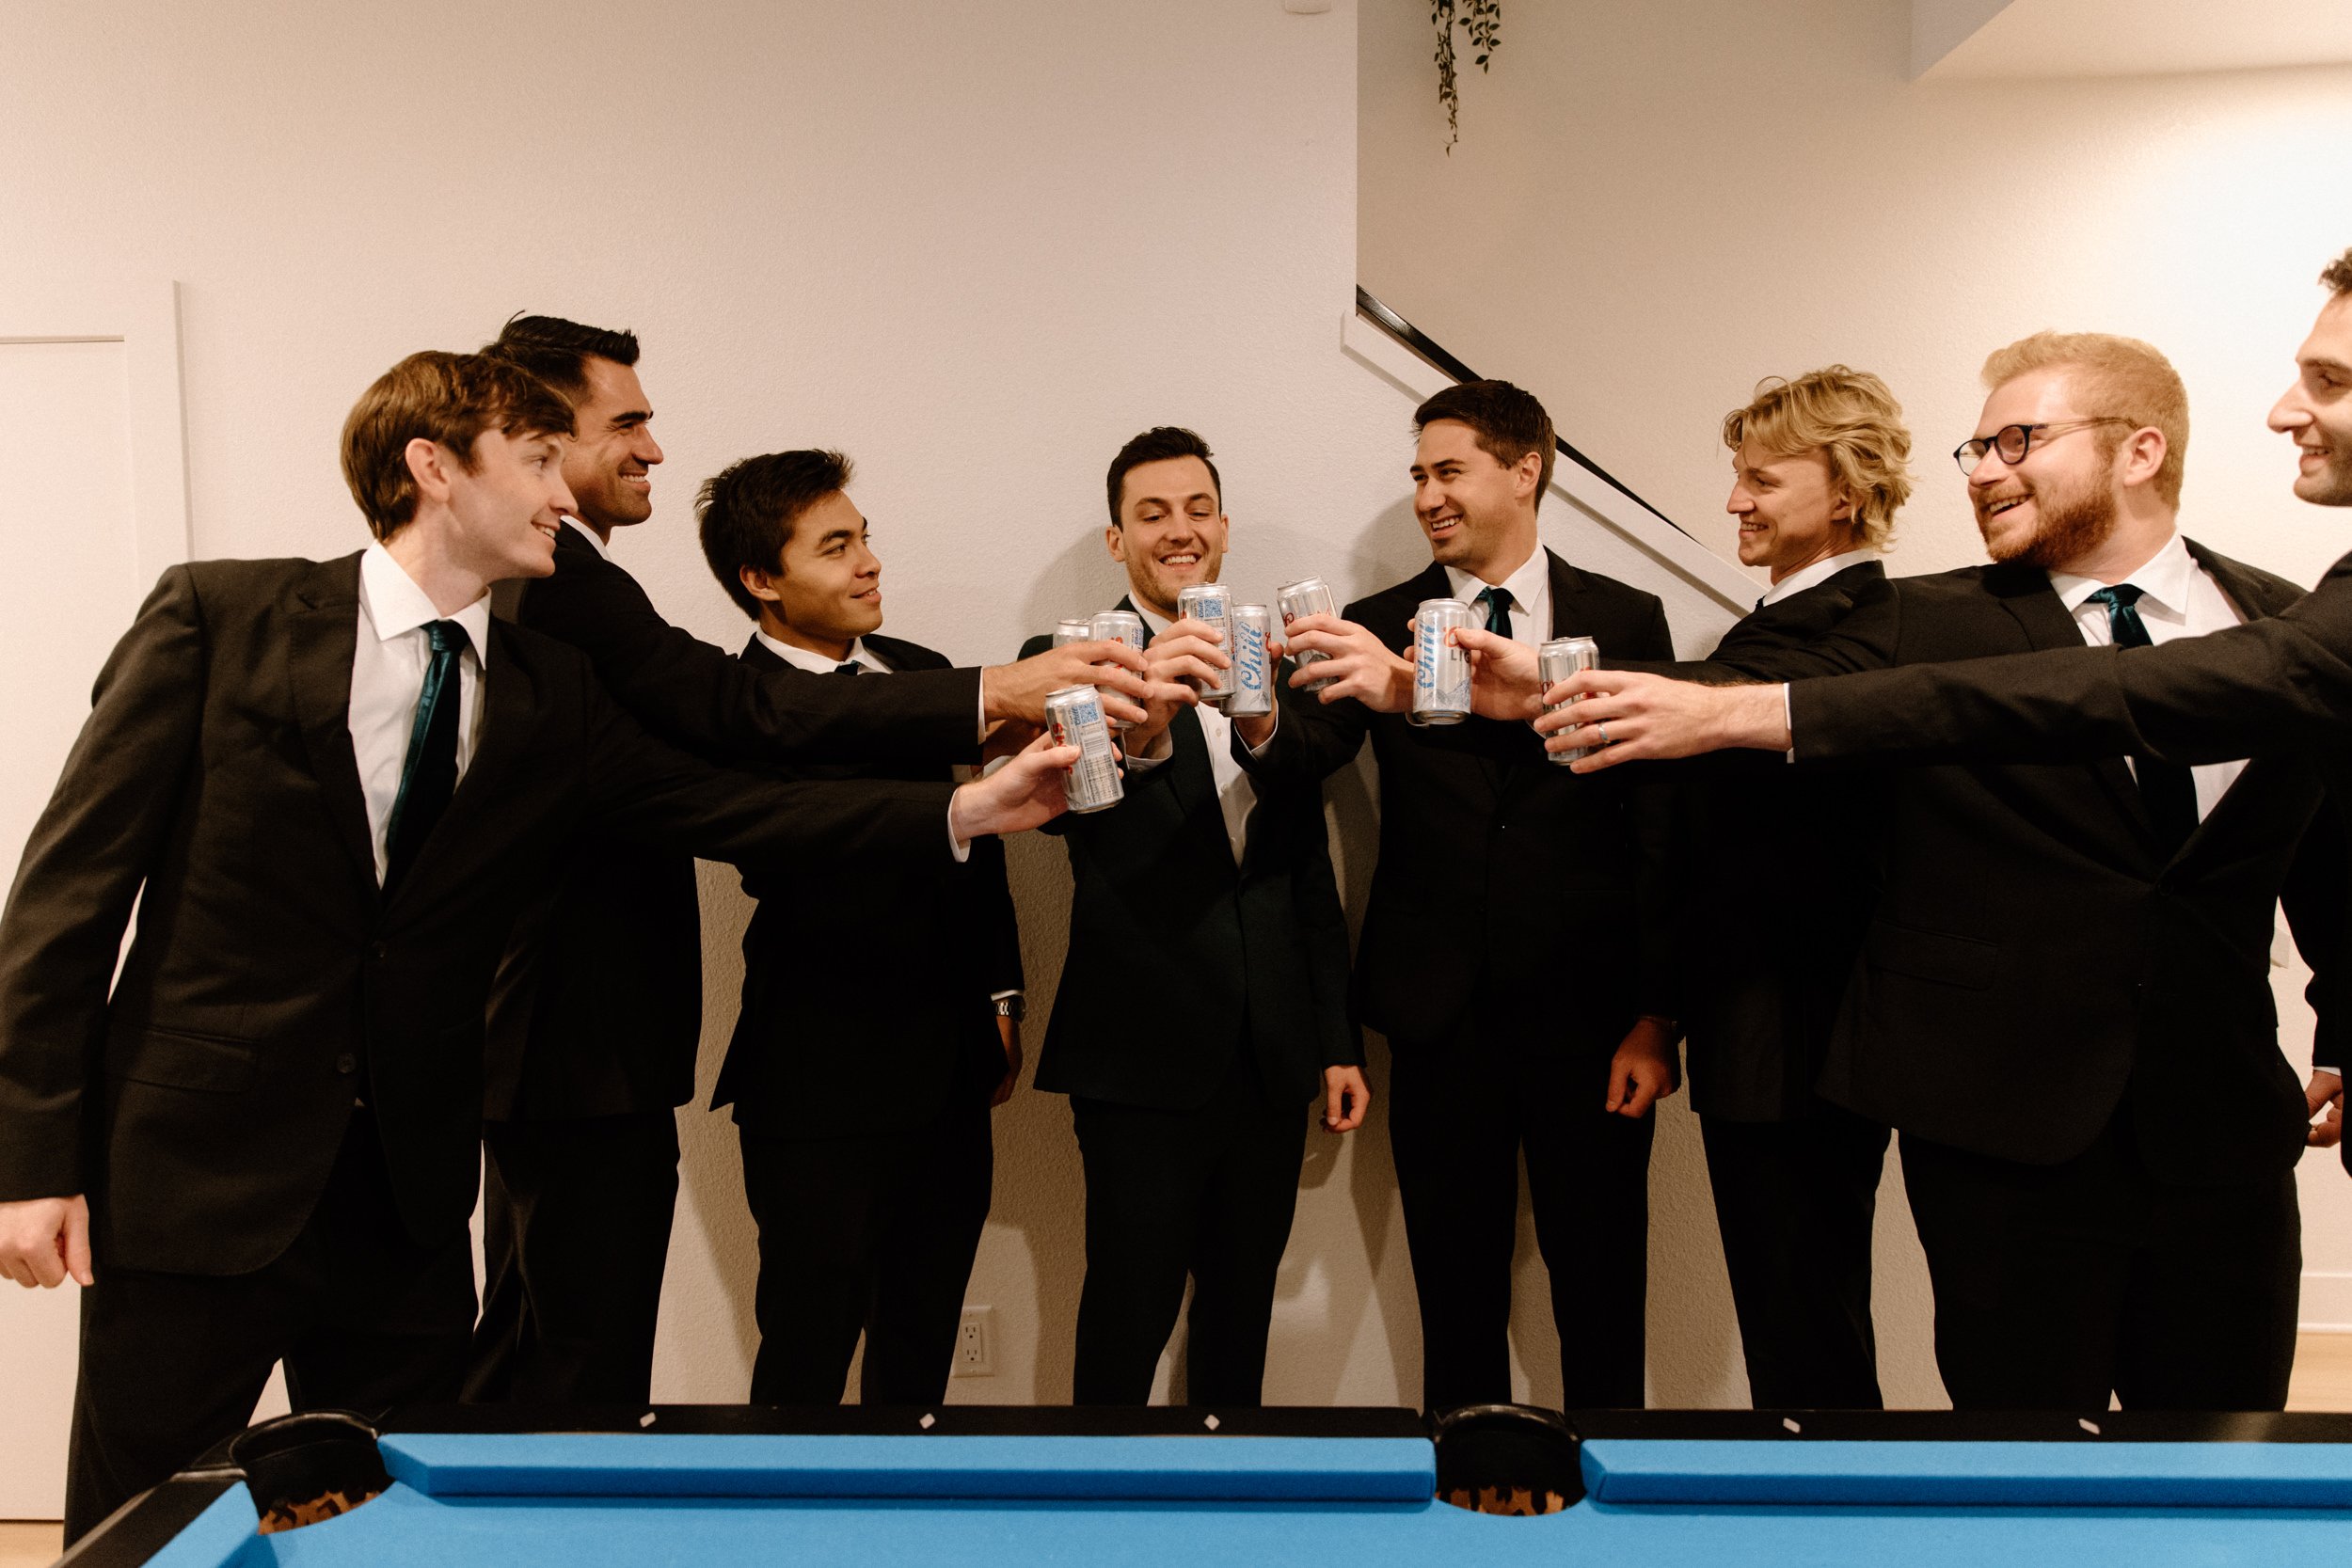 The groomsmen toast with beer cans